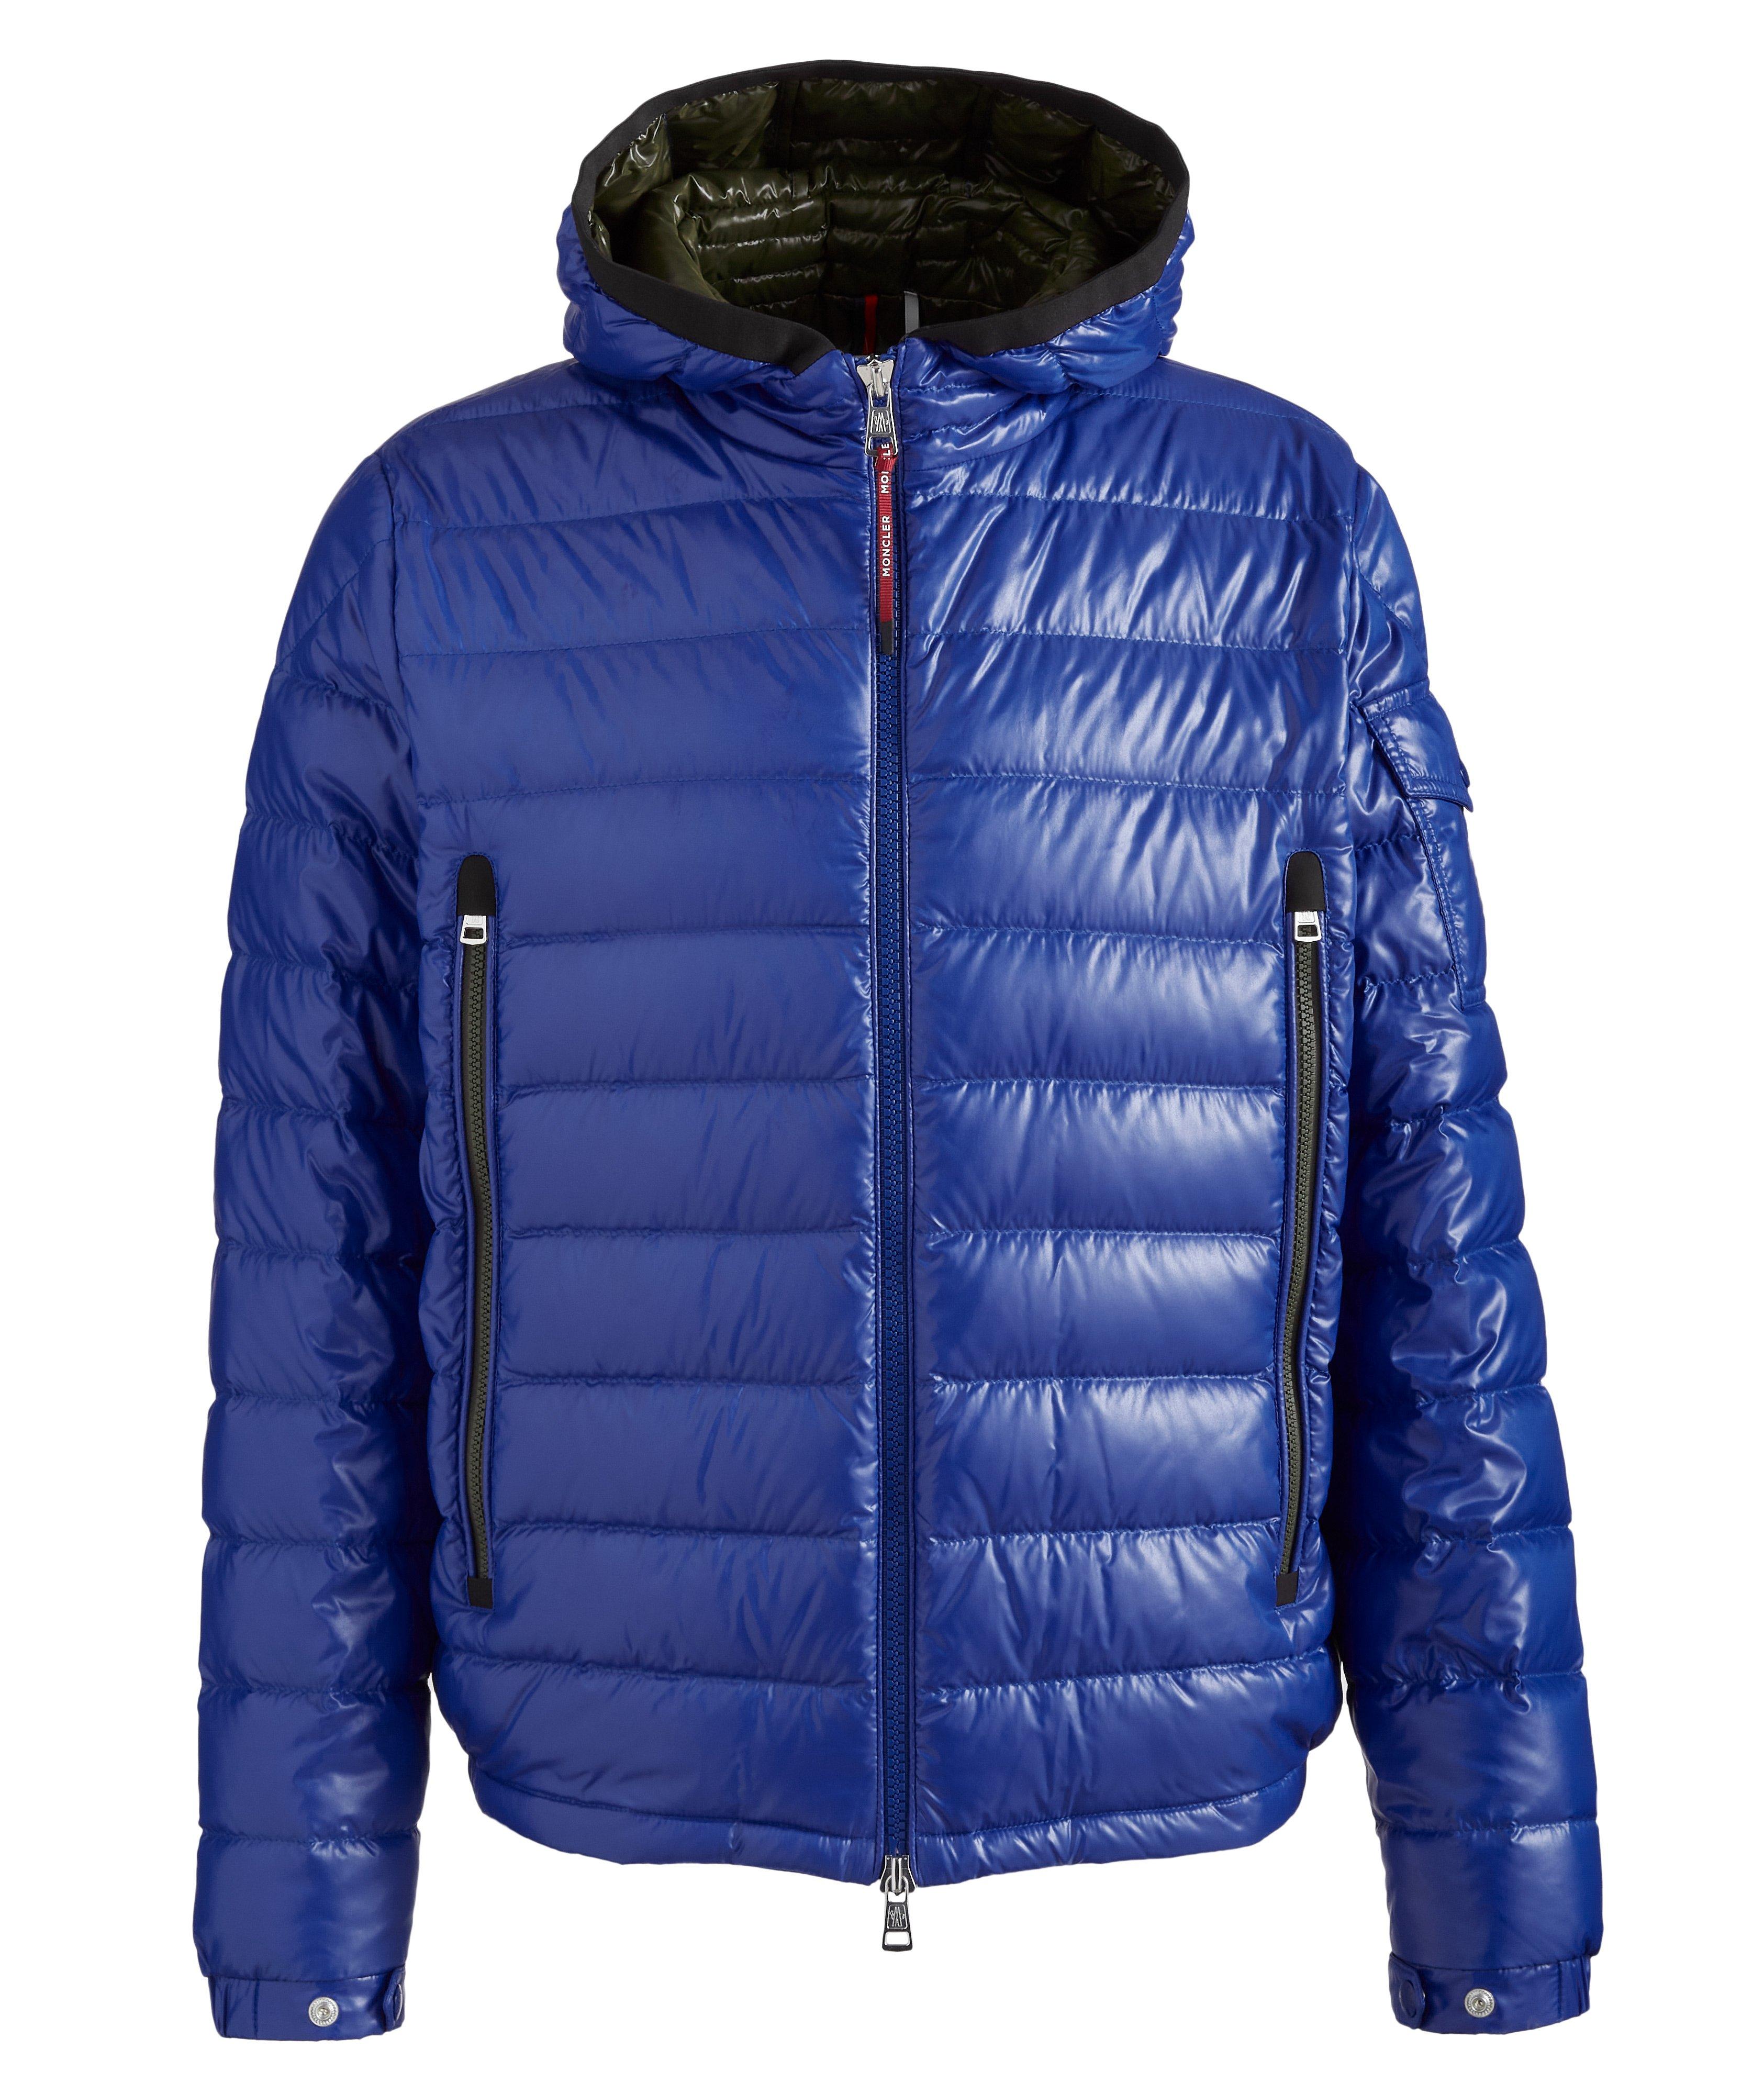 Galion Quilted Down Jacket image 0